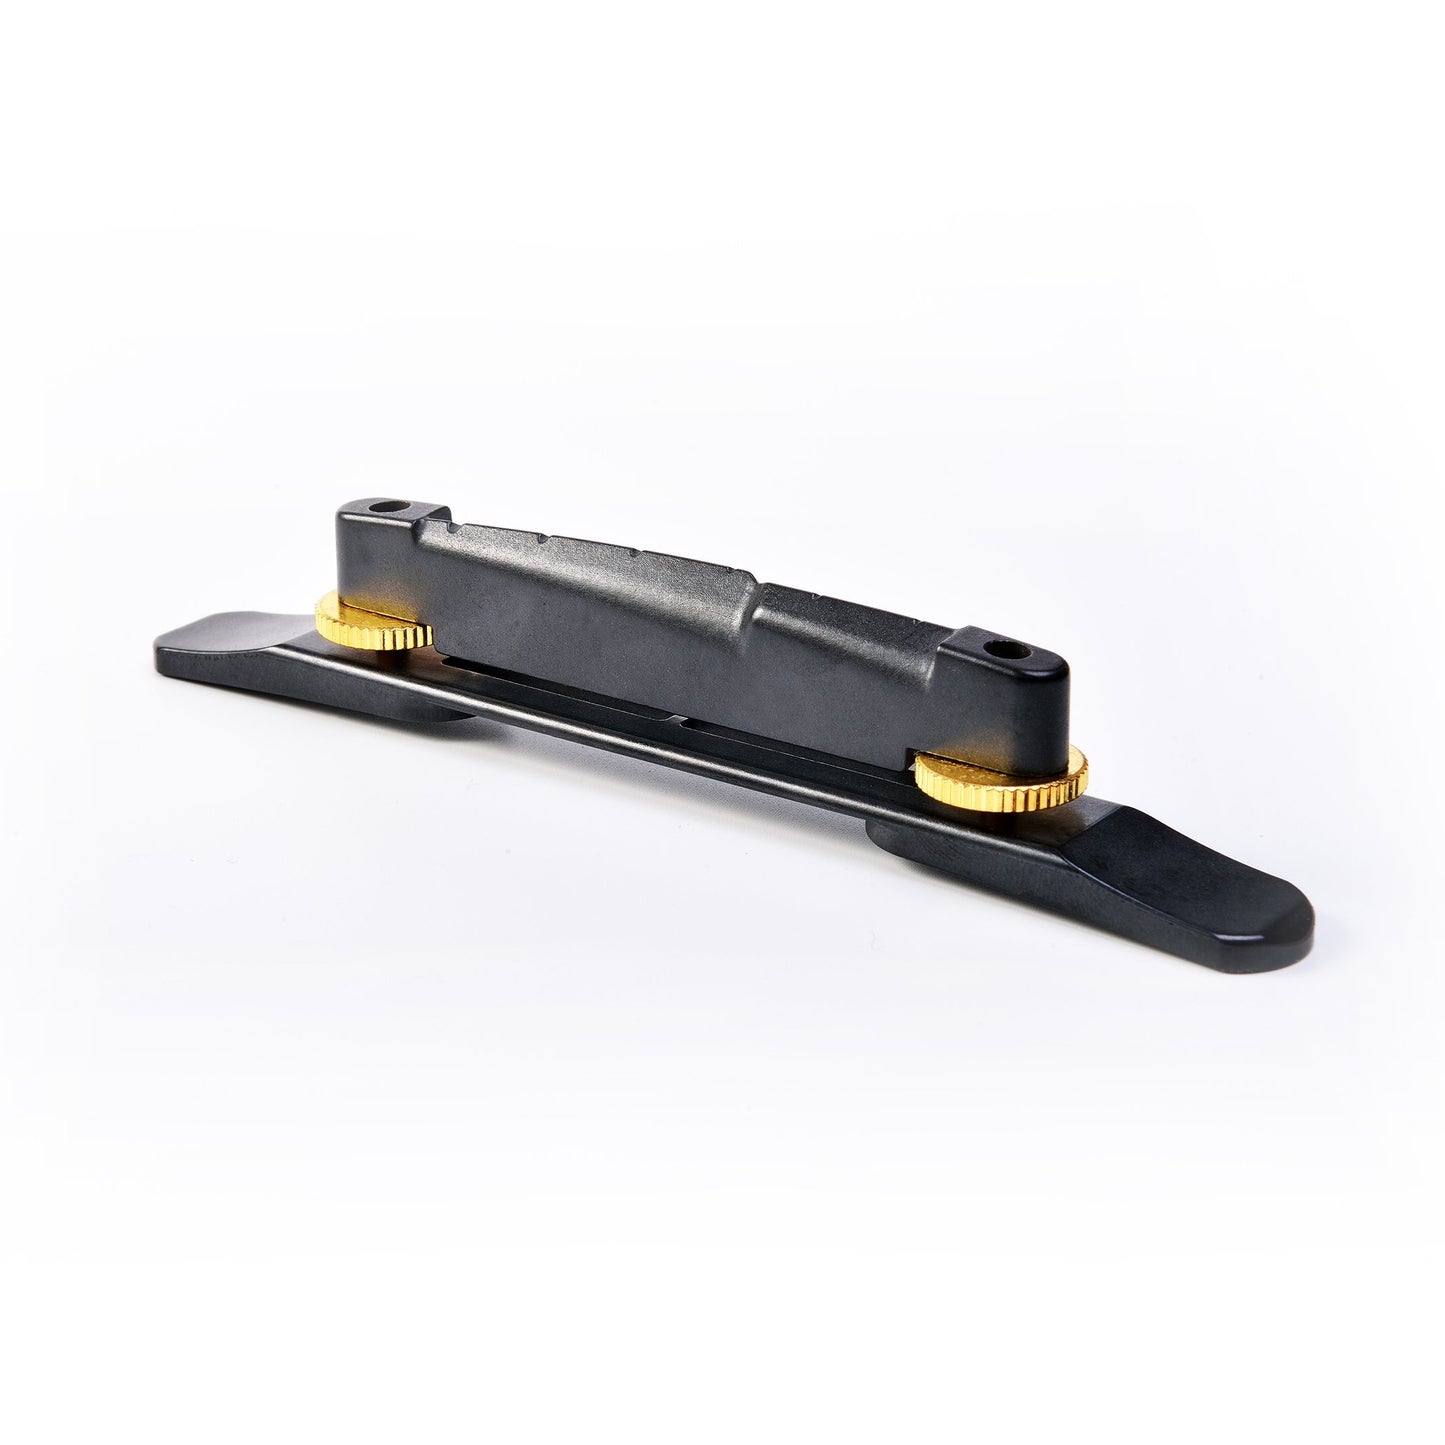 ResoMax Archtop Bridge Standard and Low Profile (select height and screw finish) - Graph Tech Guitar Labs Ltd.